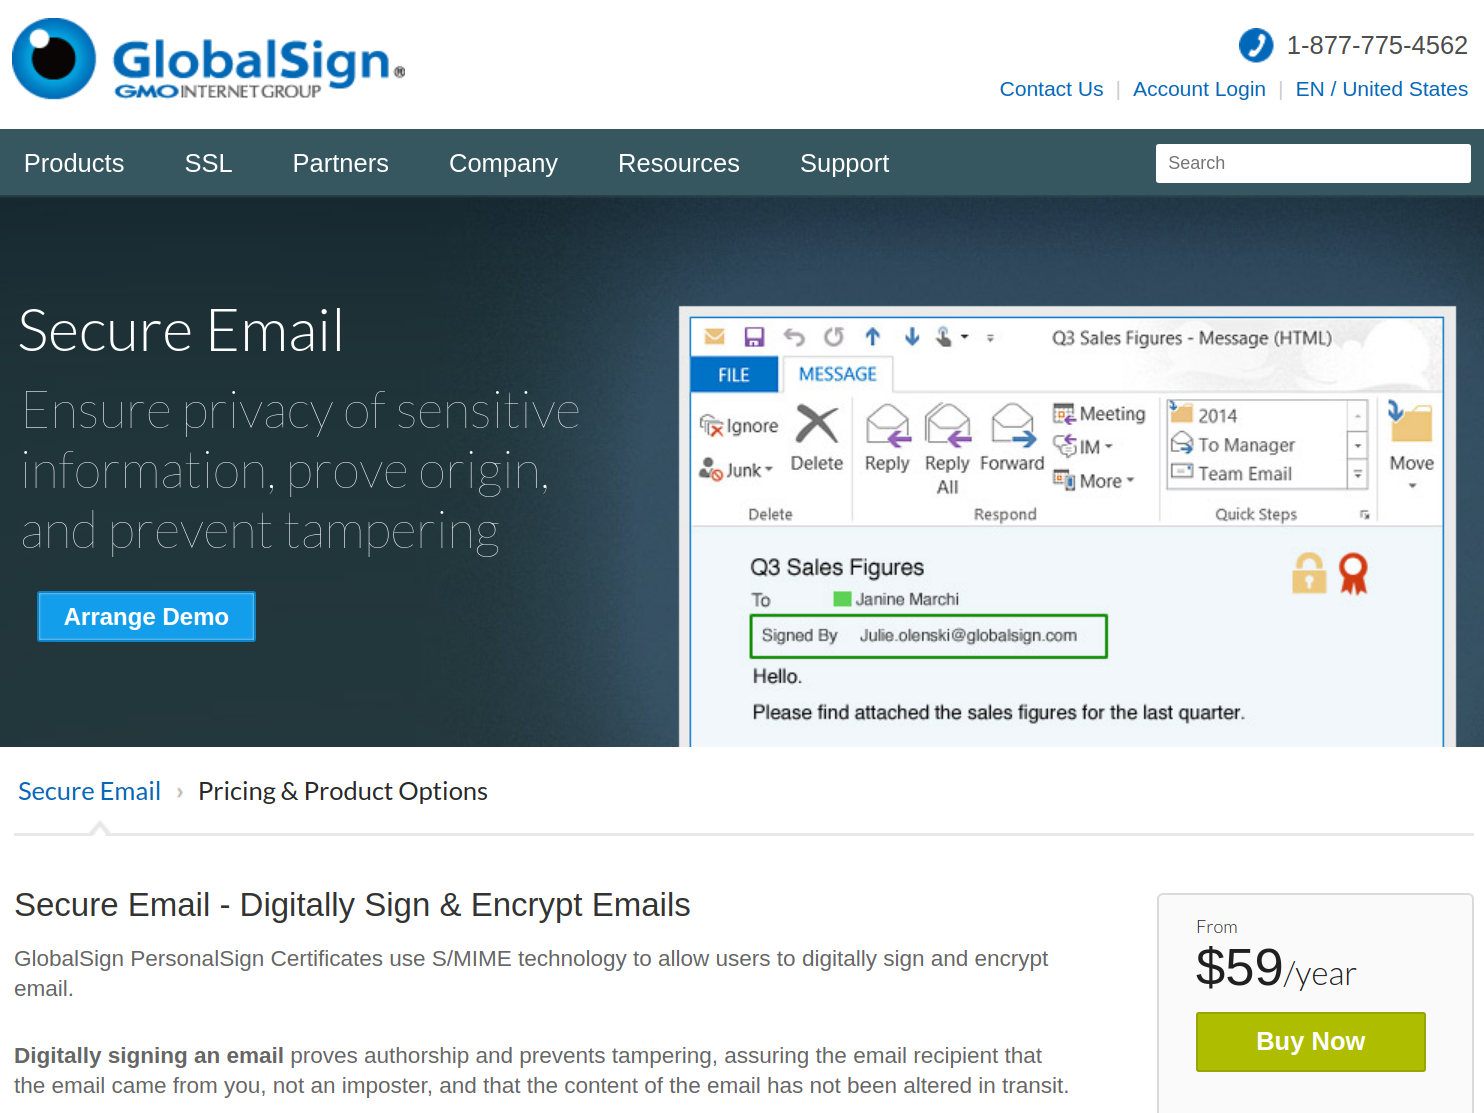 Globalsign S/MIME